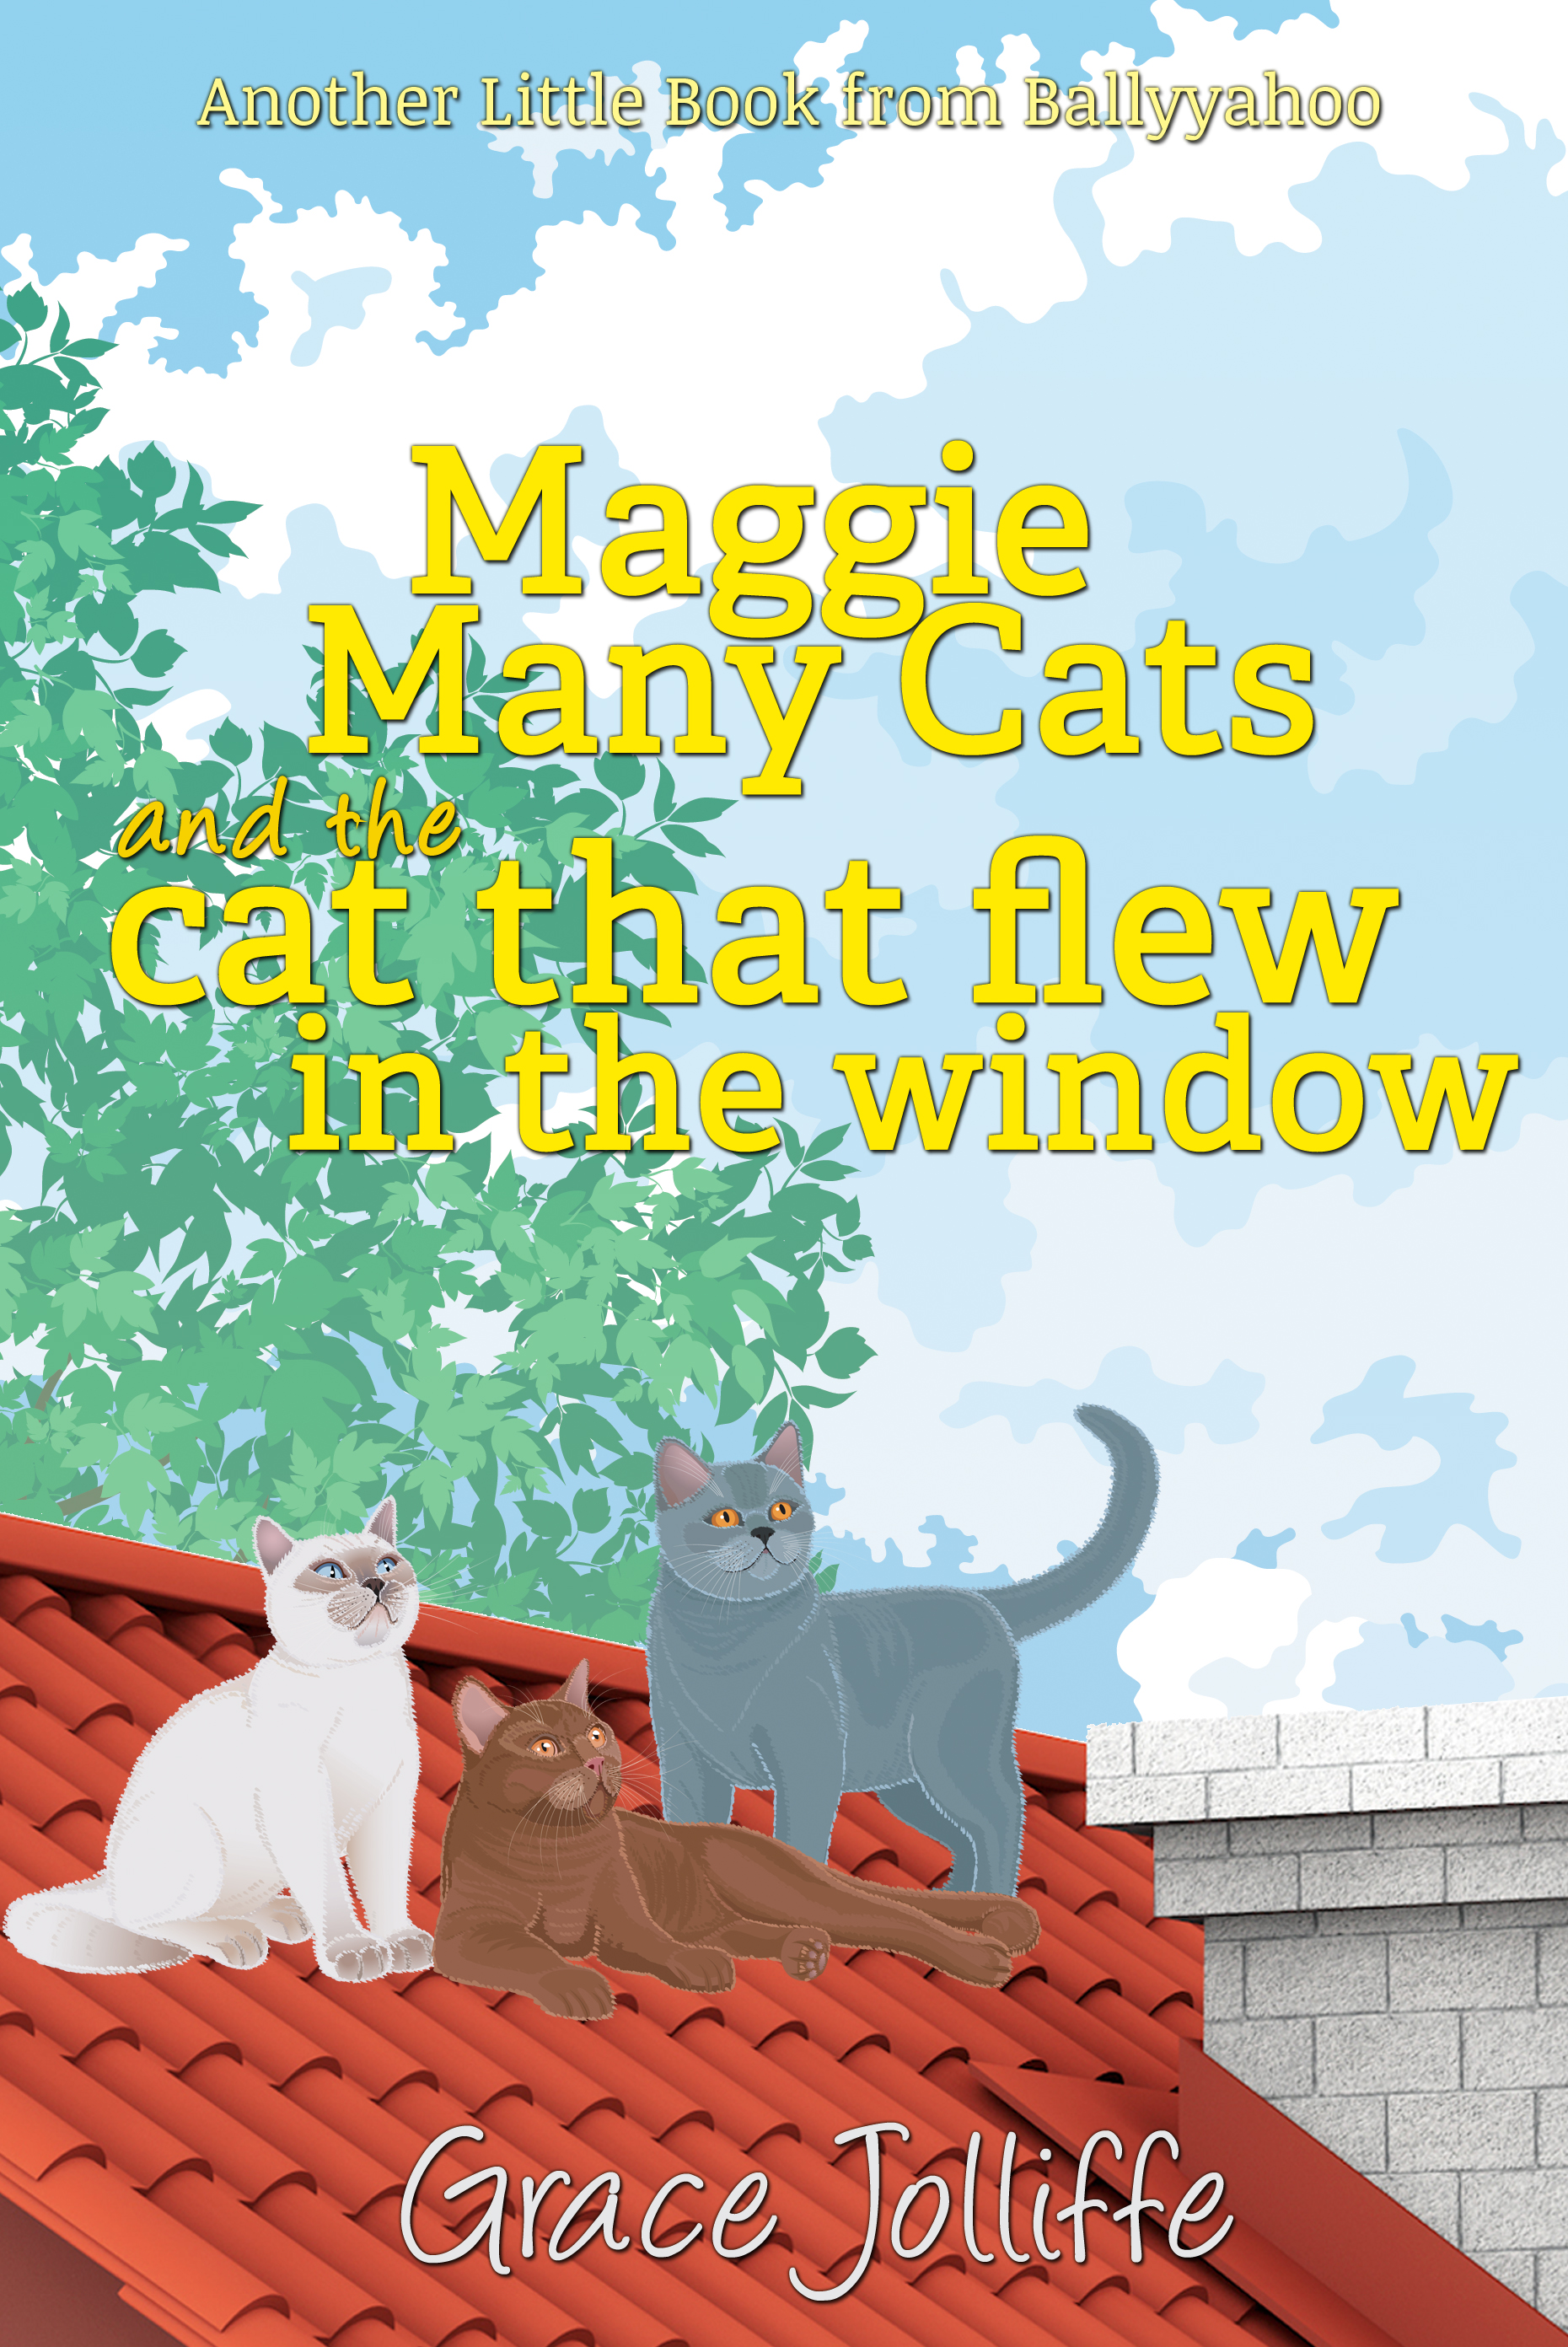 book cover of Maggie Many Cats illustrating a story about cat care